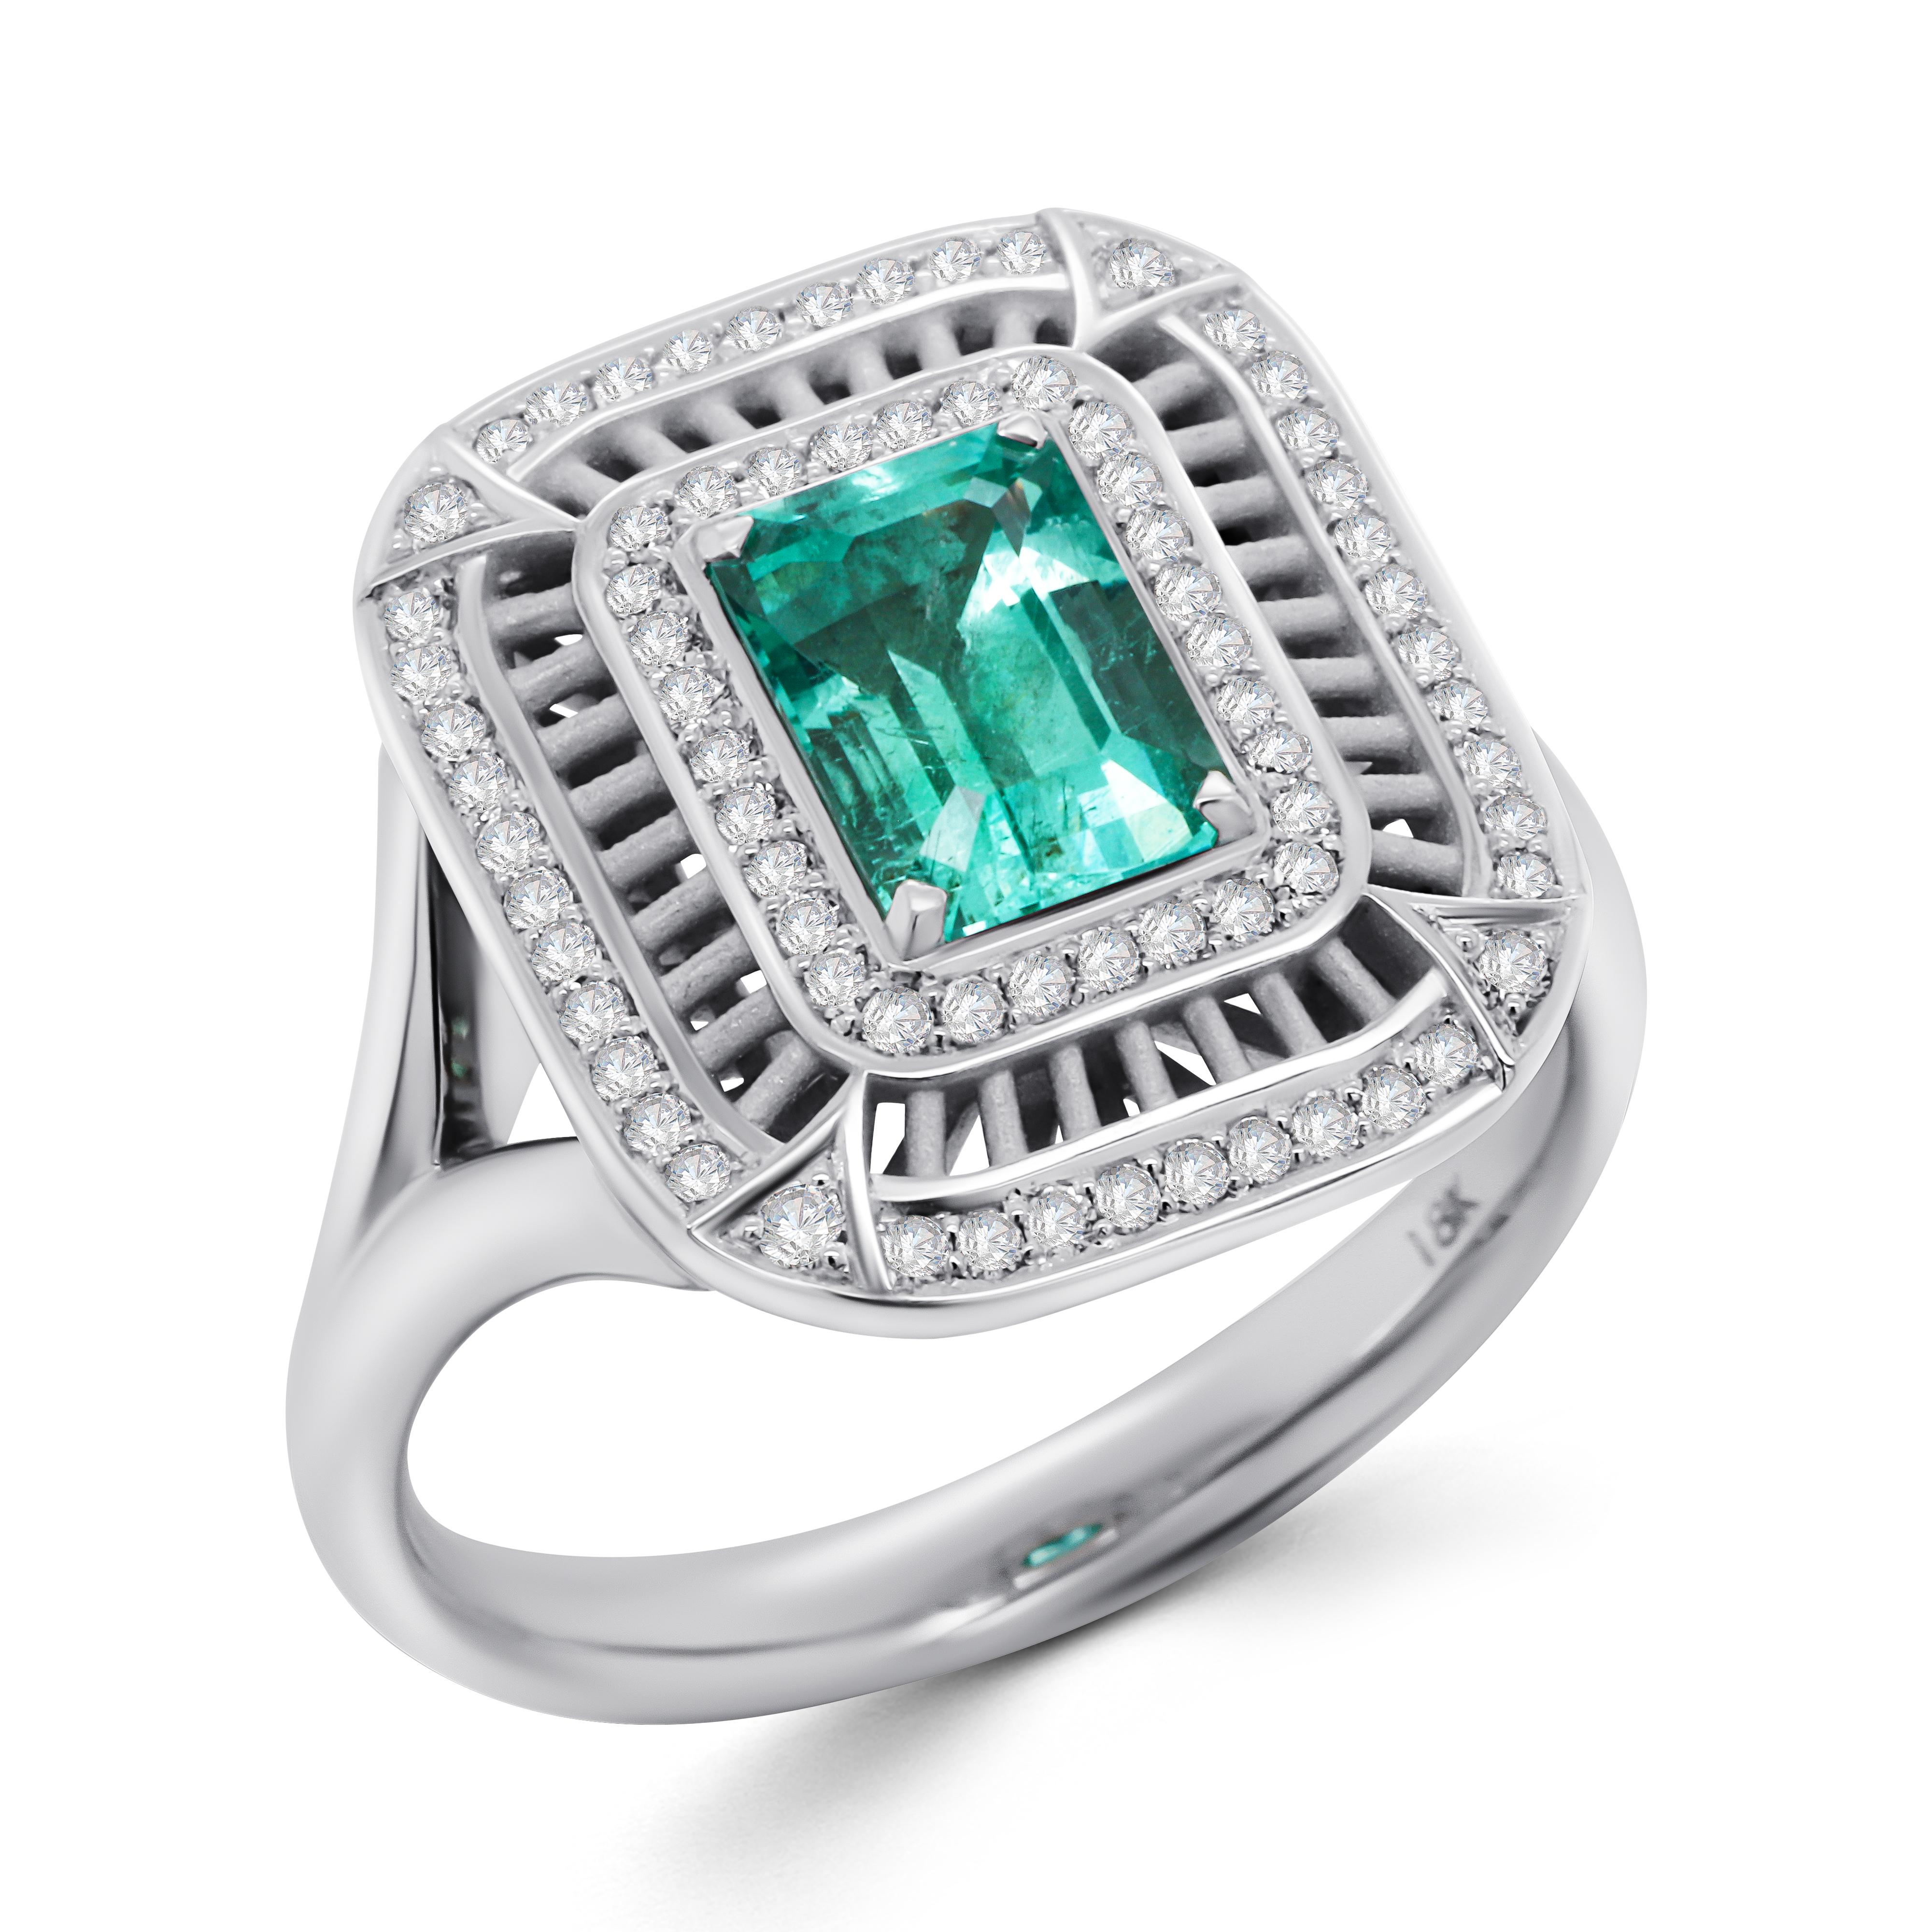 A timeless design that will never get bored and always be stylish through a years. 
The ring with an Emerald in the center and two rows of Diamonds. The Emerald is from Ural Mountains in Russia which is famous for its rare deposits of very clean